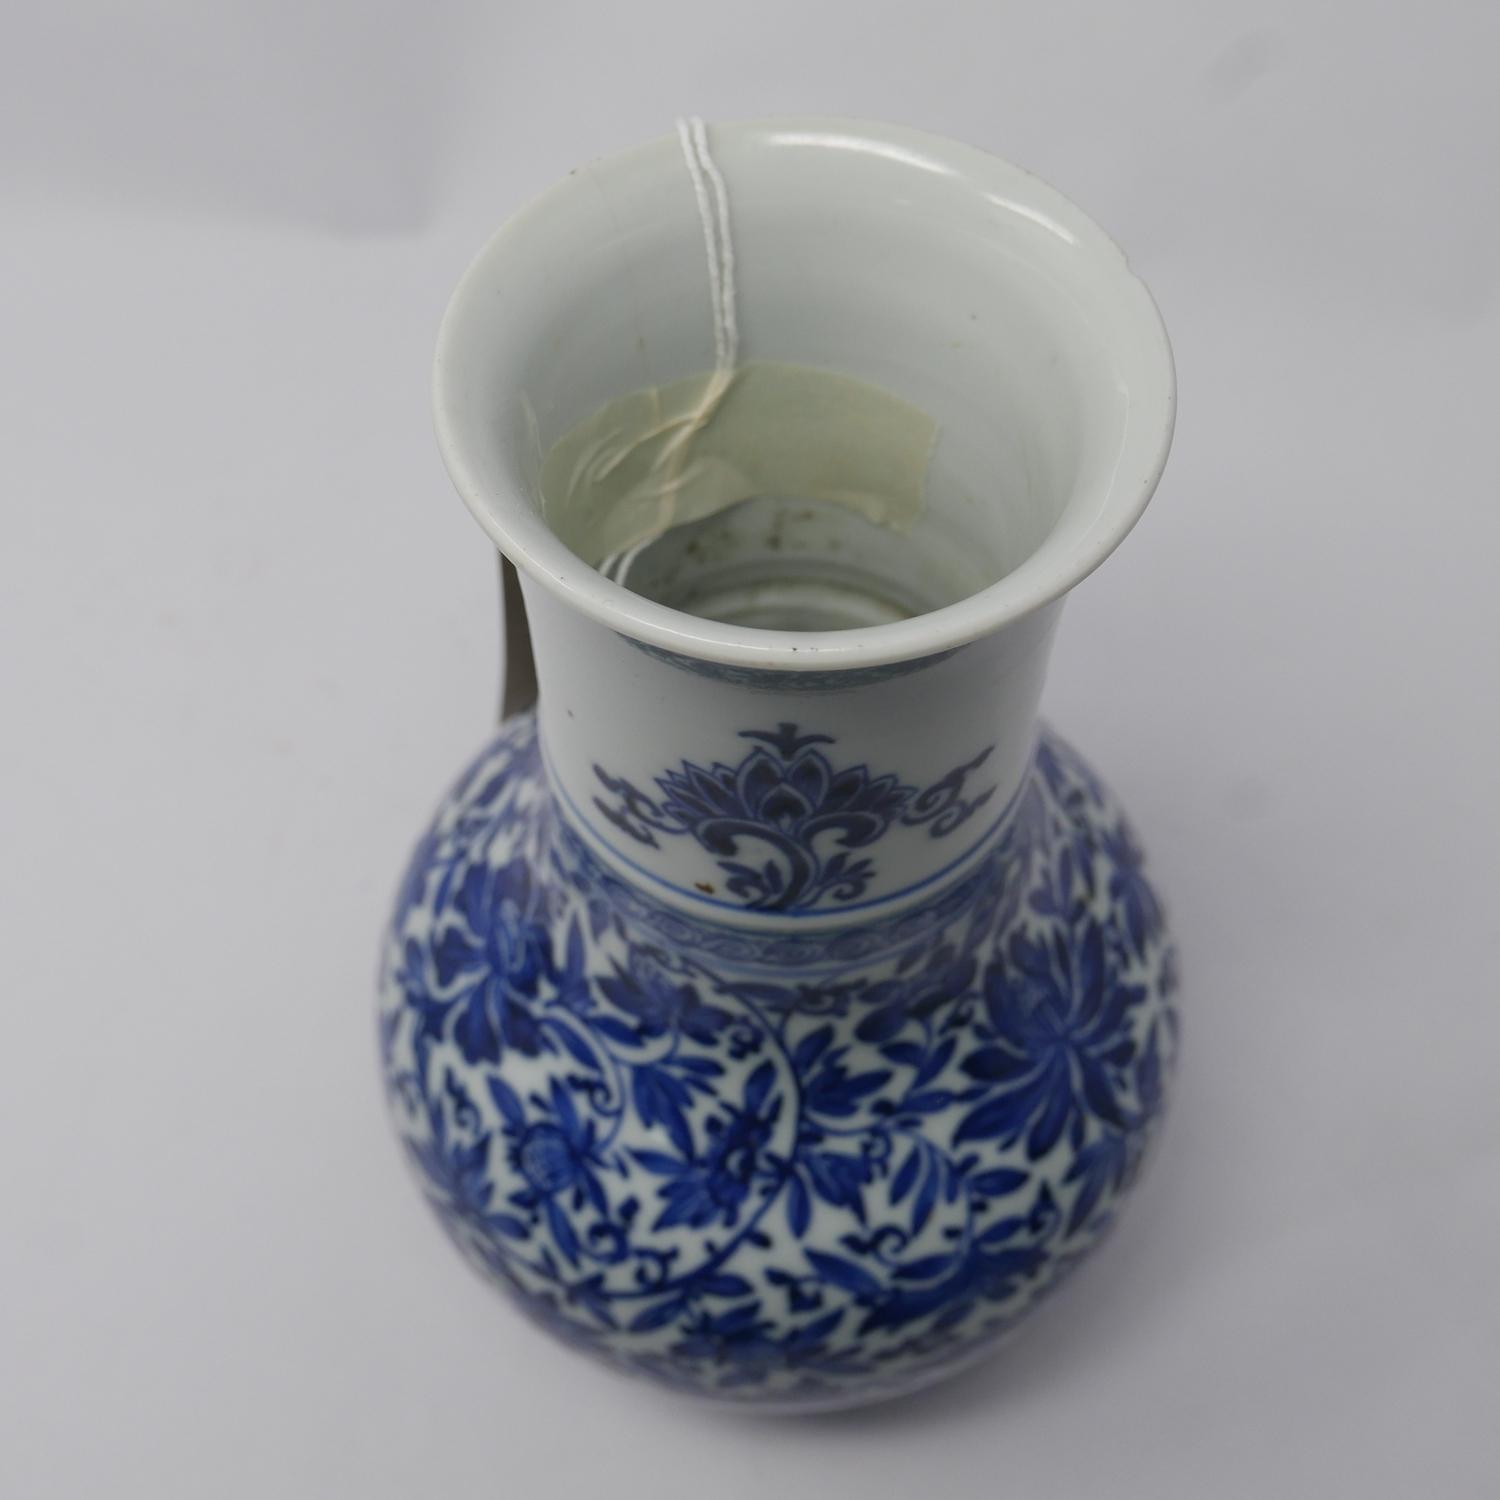 A 19th century Chinese blue & white porcelain vase with floral decoration, small chip to rim and - Image 3 of 3